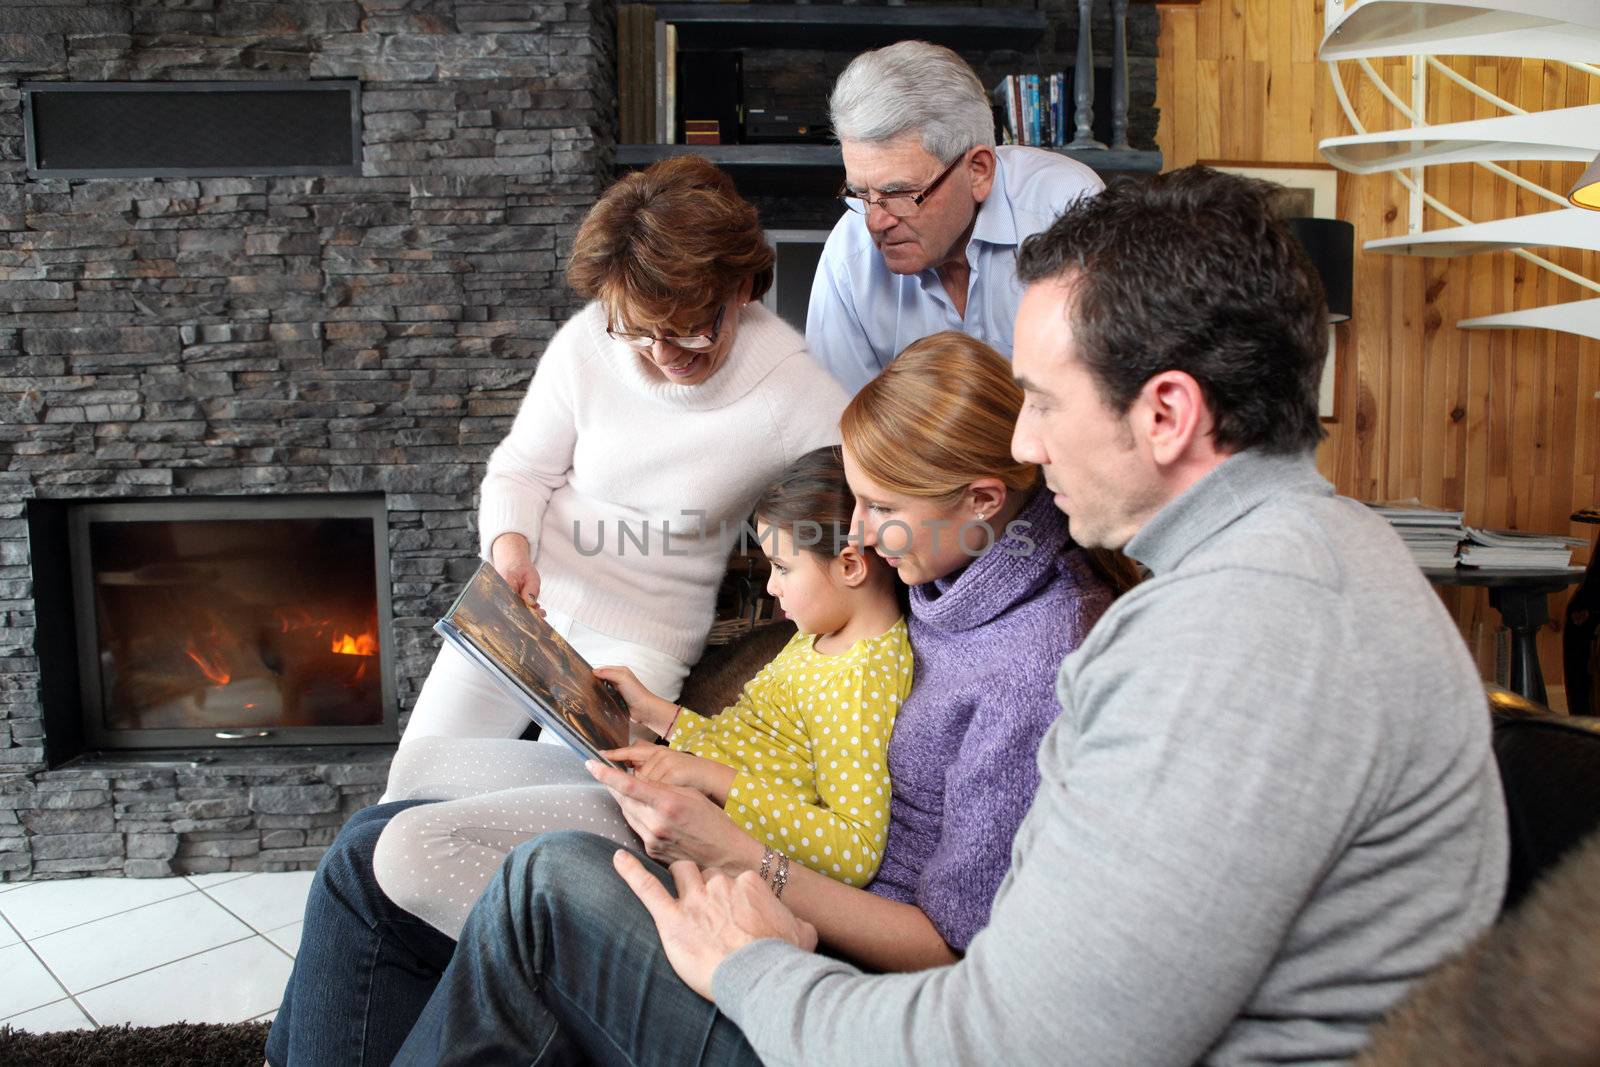 Family at home around a fireplace by phovoir